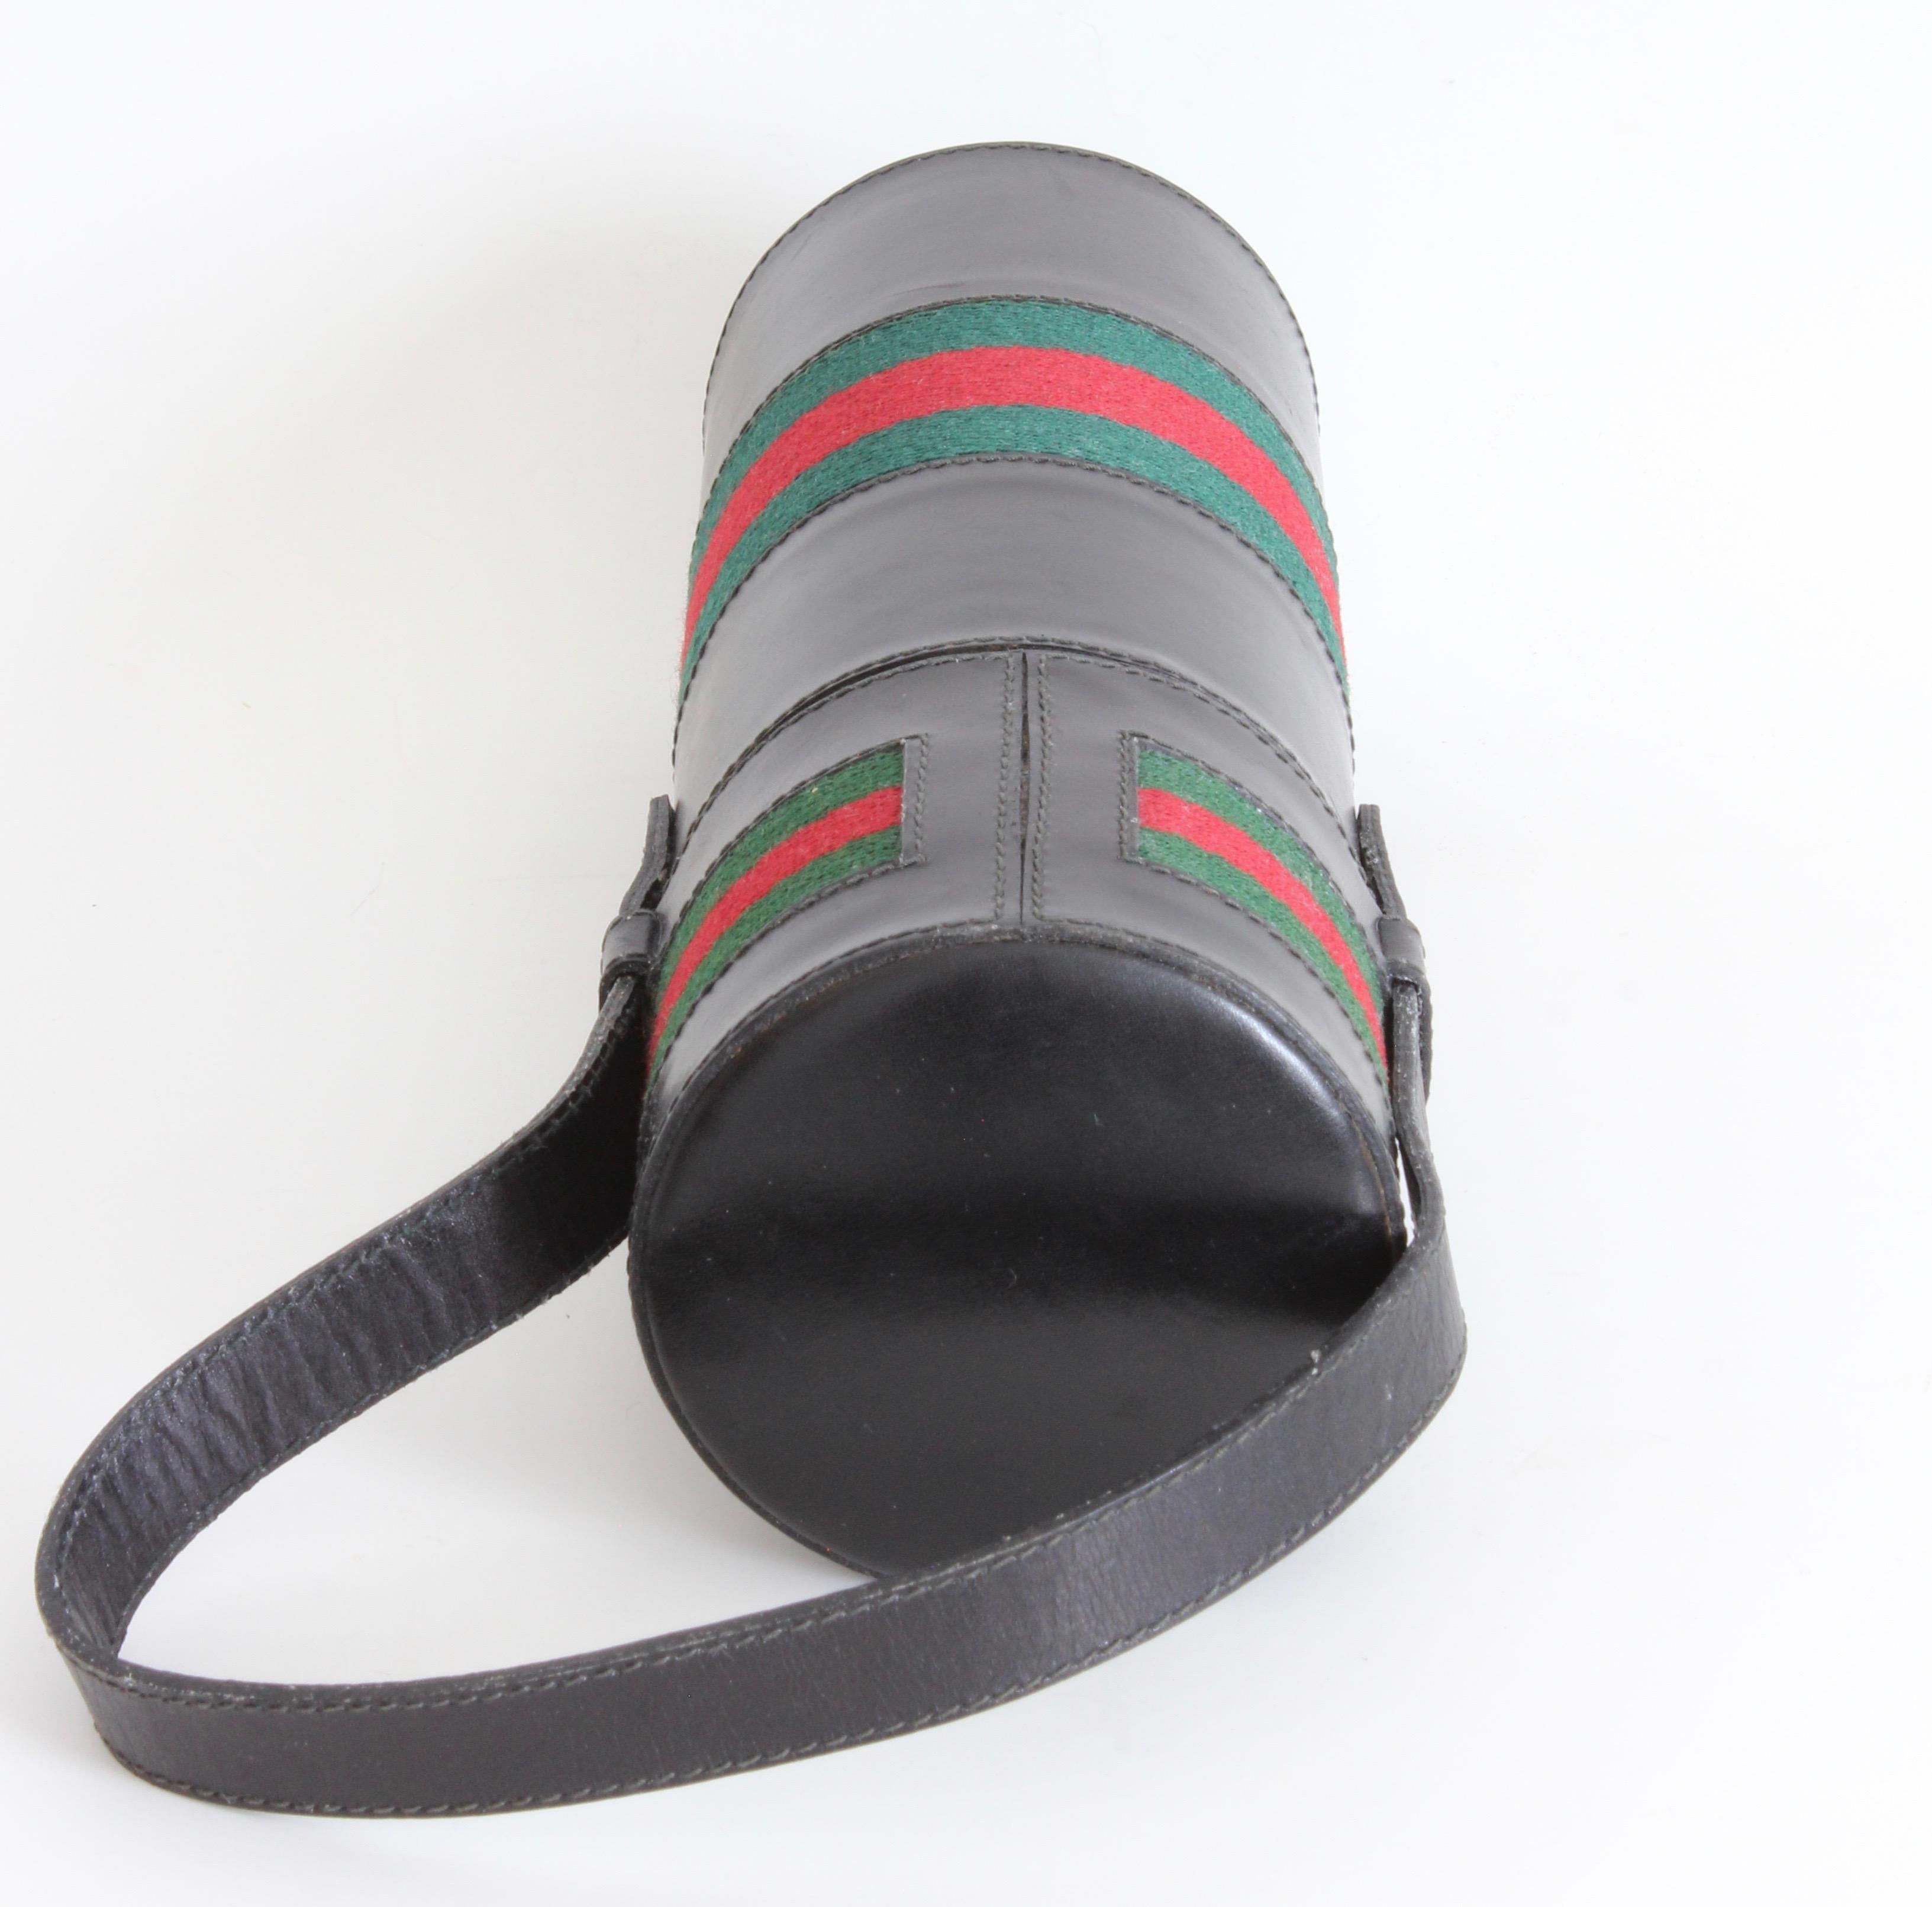 Gucci Black Leather Tote Bag with Insulated Bottle Red Green Webbing Barware 70s In Fair Condition For Sale In Port Saint Lucie, FL